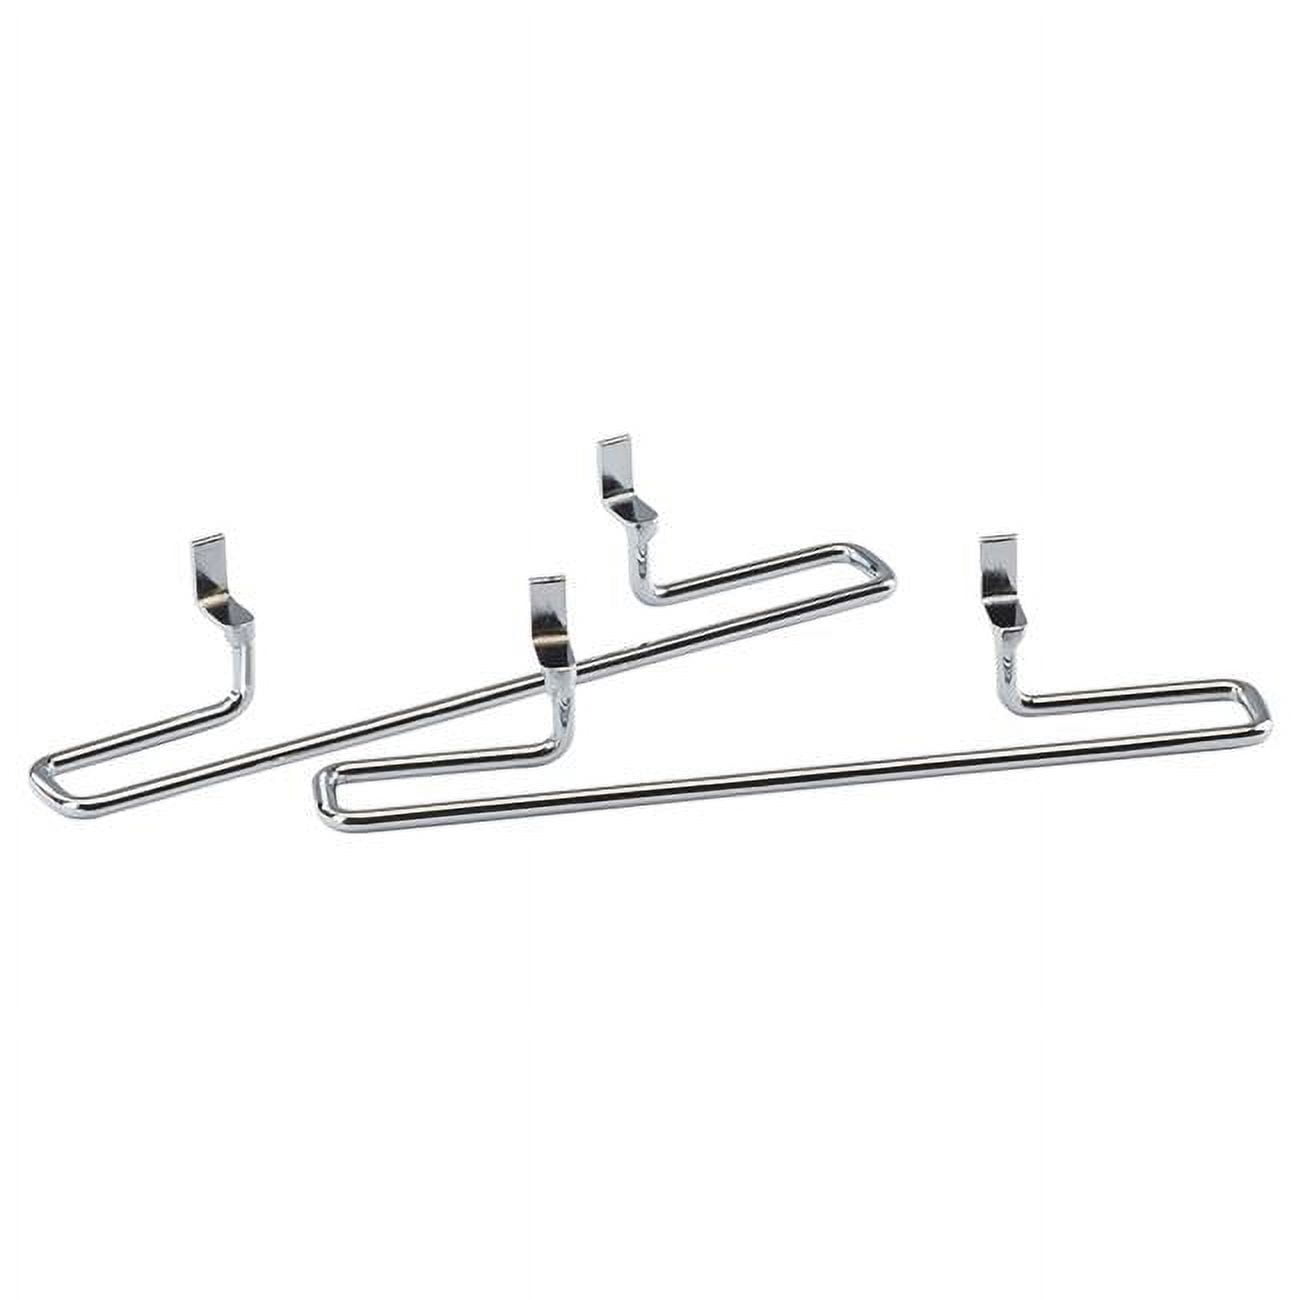 Picture of Cal Mil 3723-49 Chrome Shelf Bracket - 12 x 2 in.